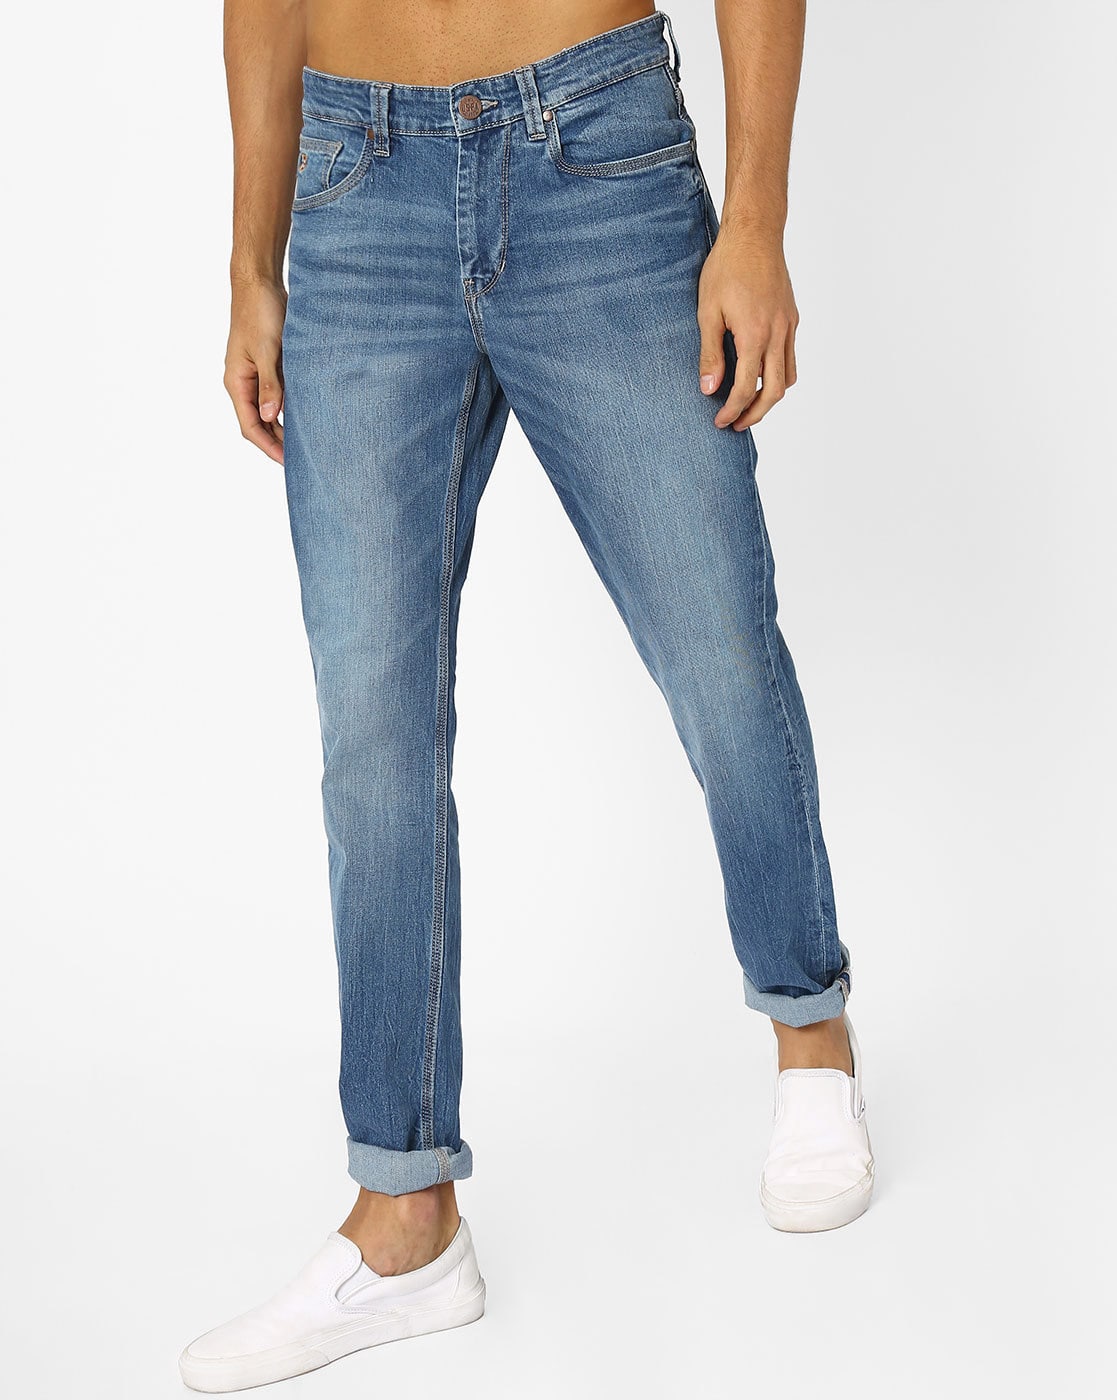 us polo delta slim tapered jeans